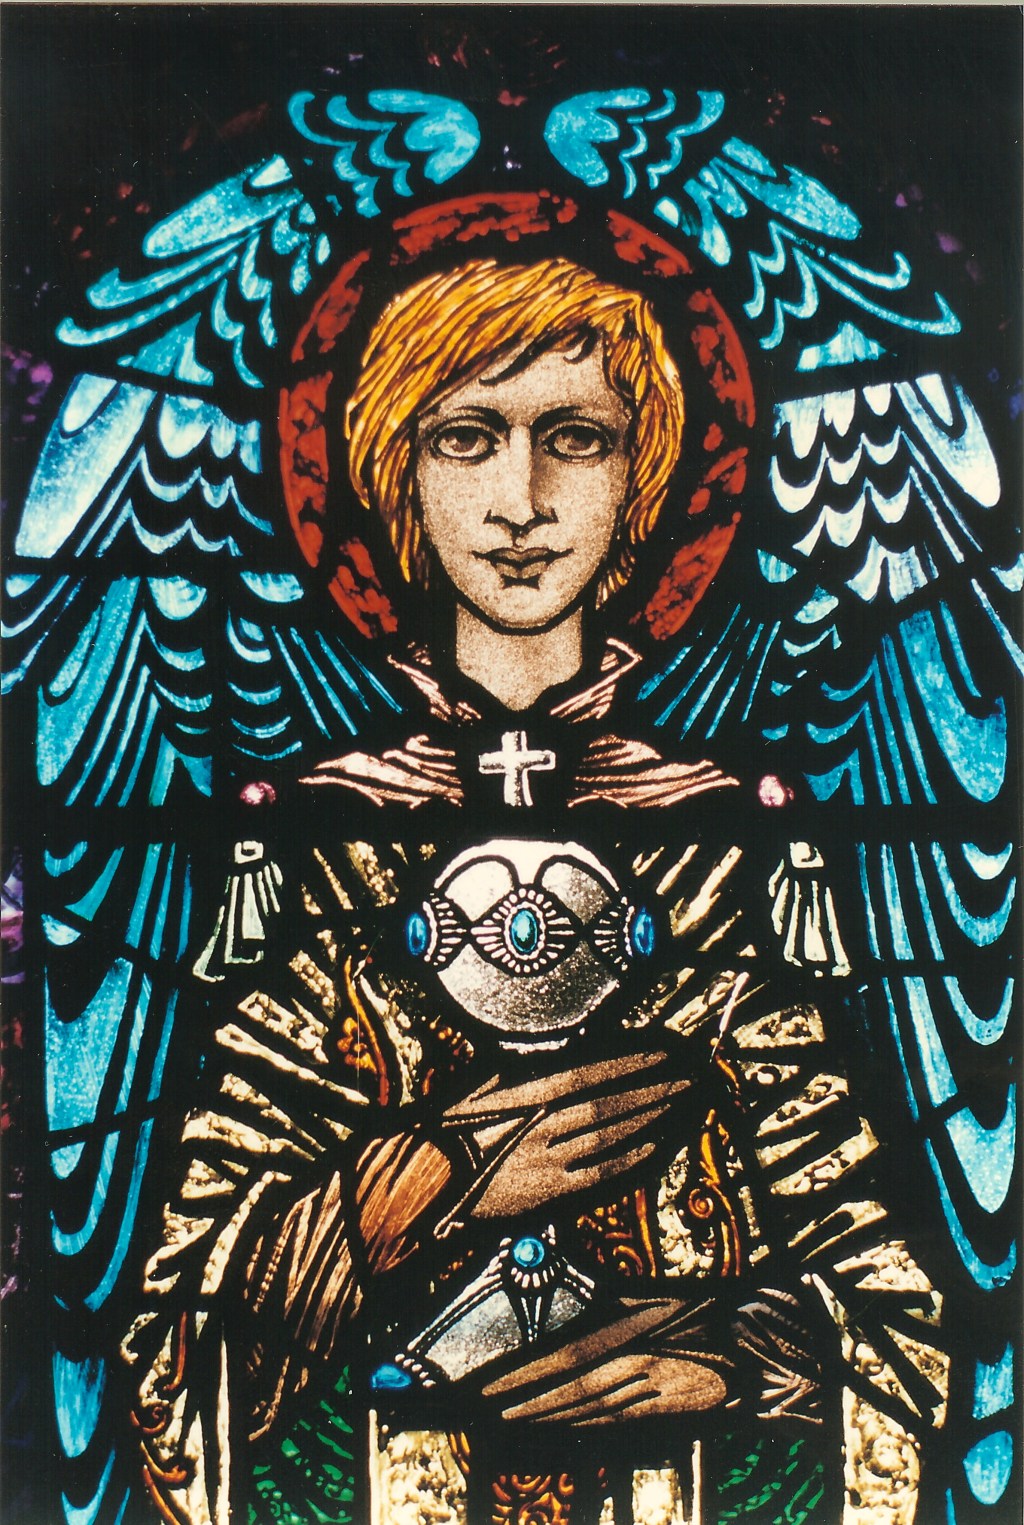 Angel depicted in stained glass